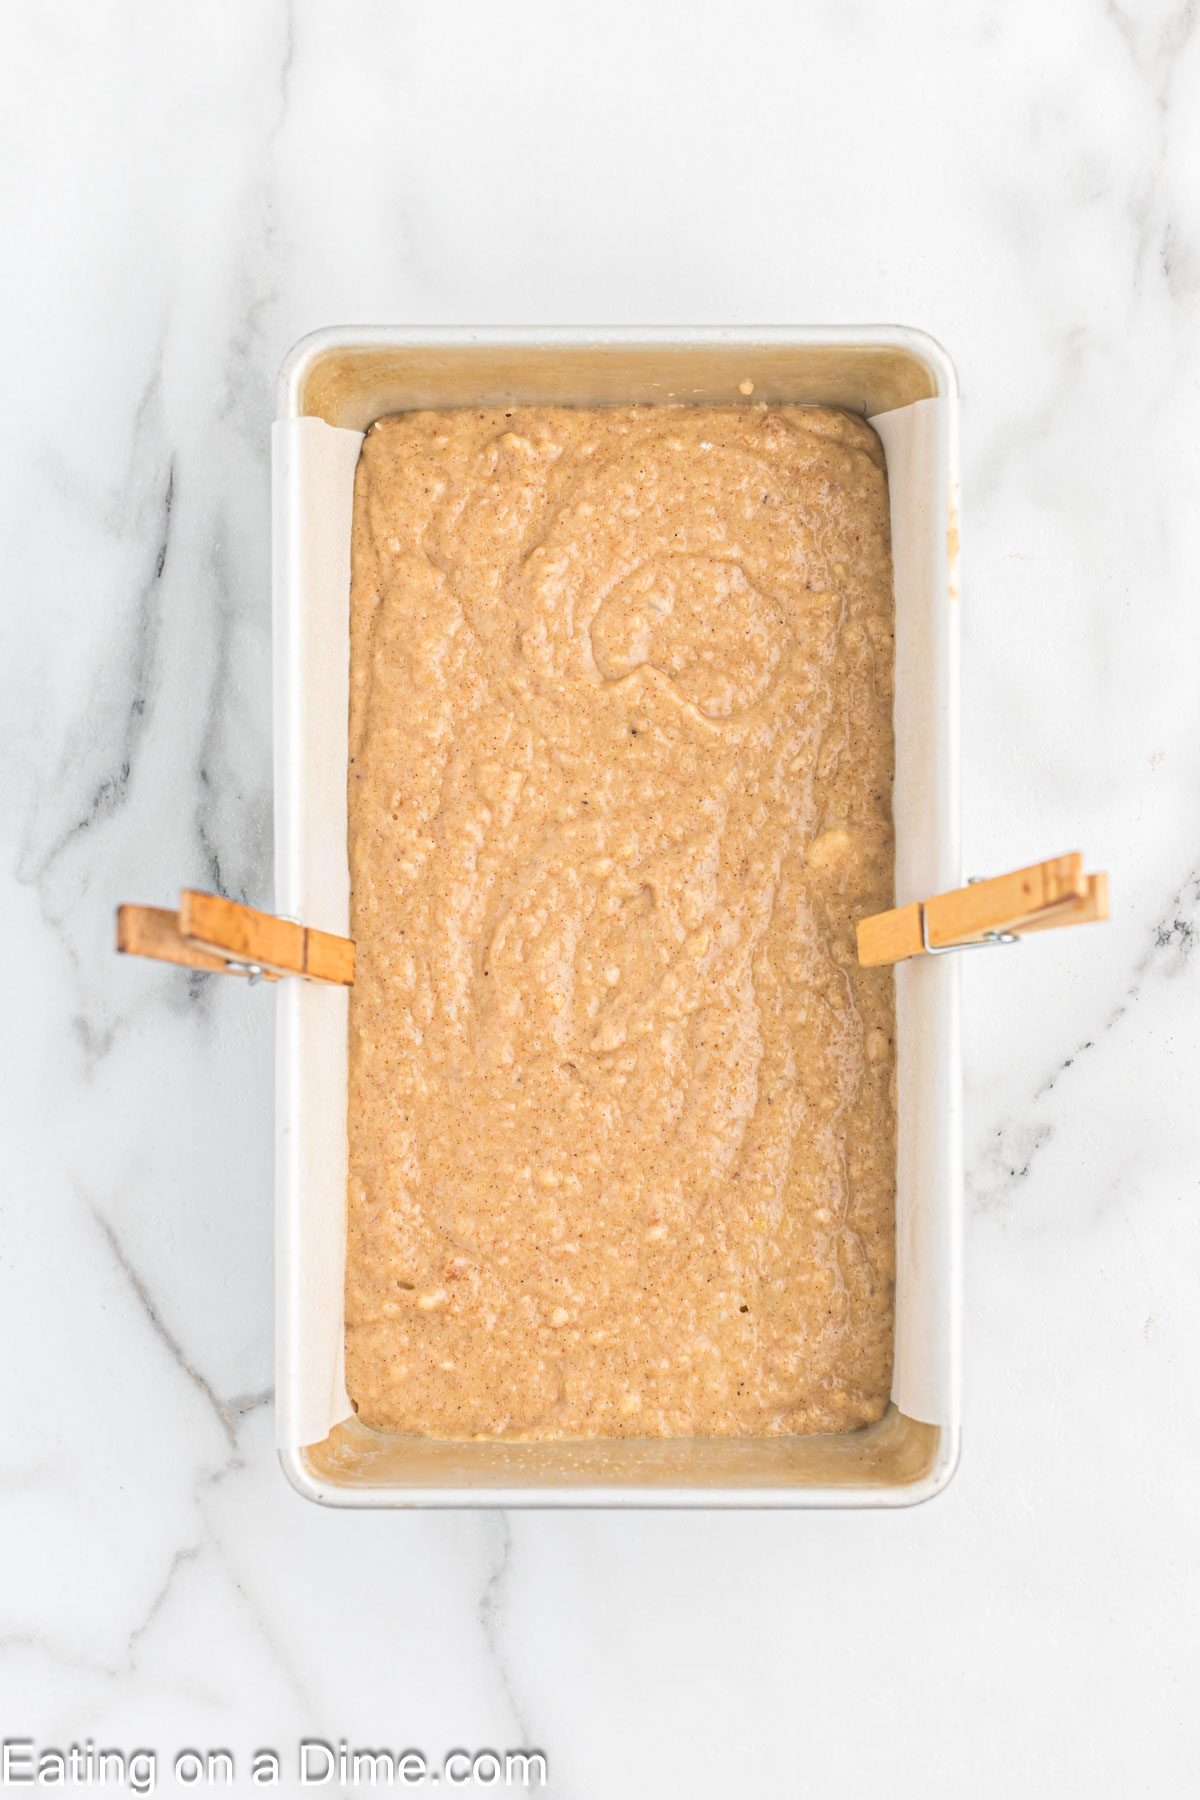 Pouring the applesauce batter into prepared loaf pan